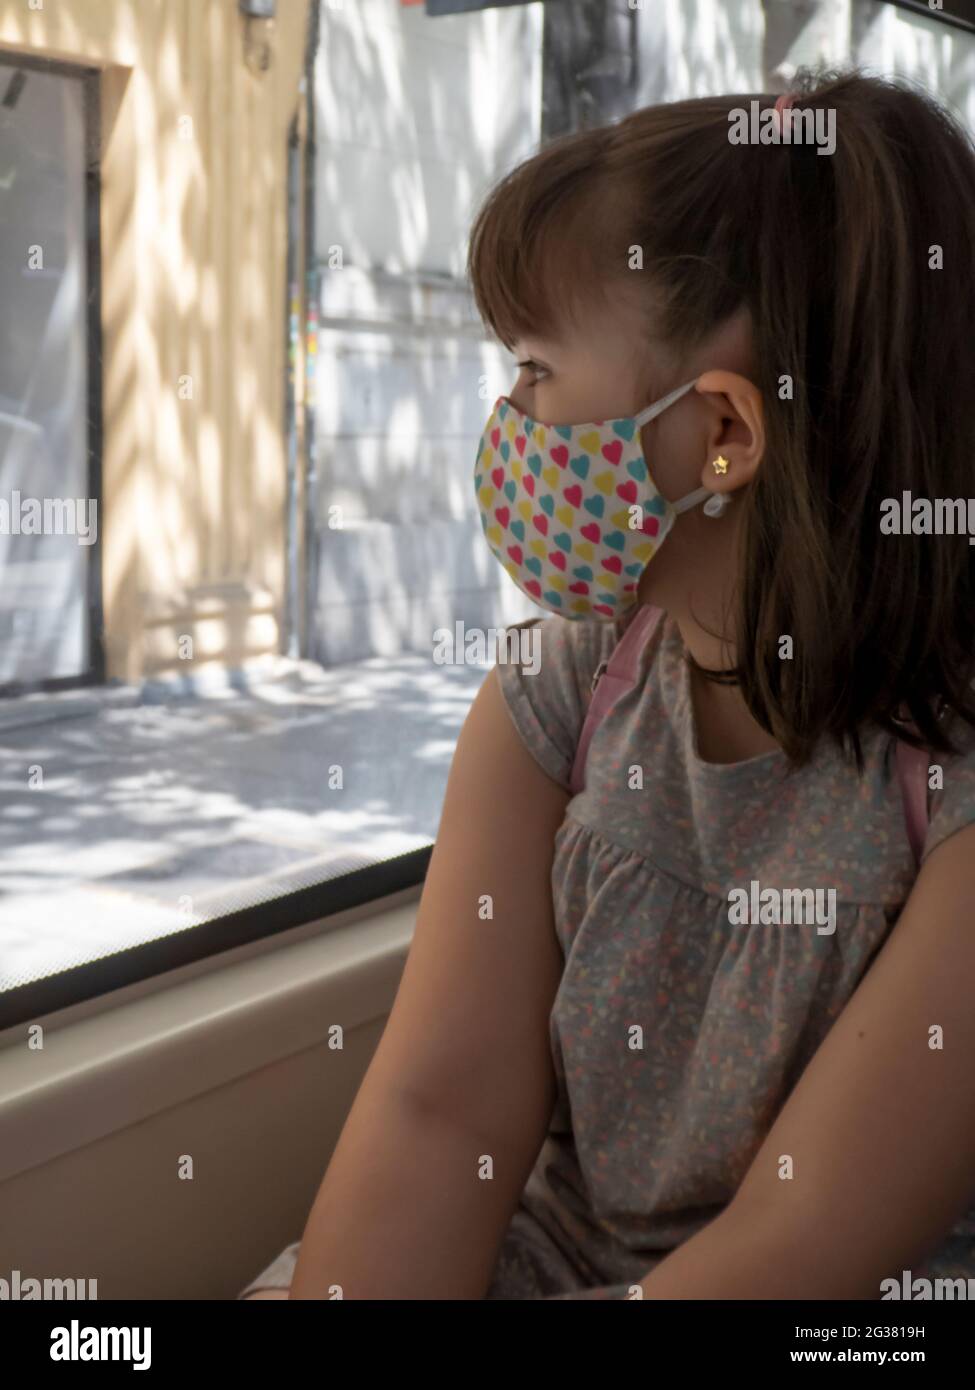 Little girl with a colorful face mask looking out the window of a bus in the city Stock Photo